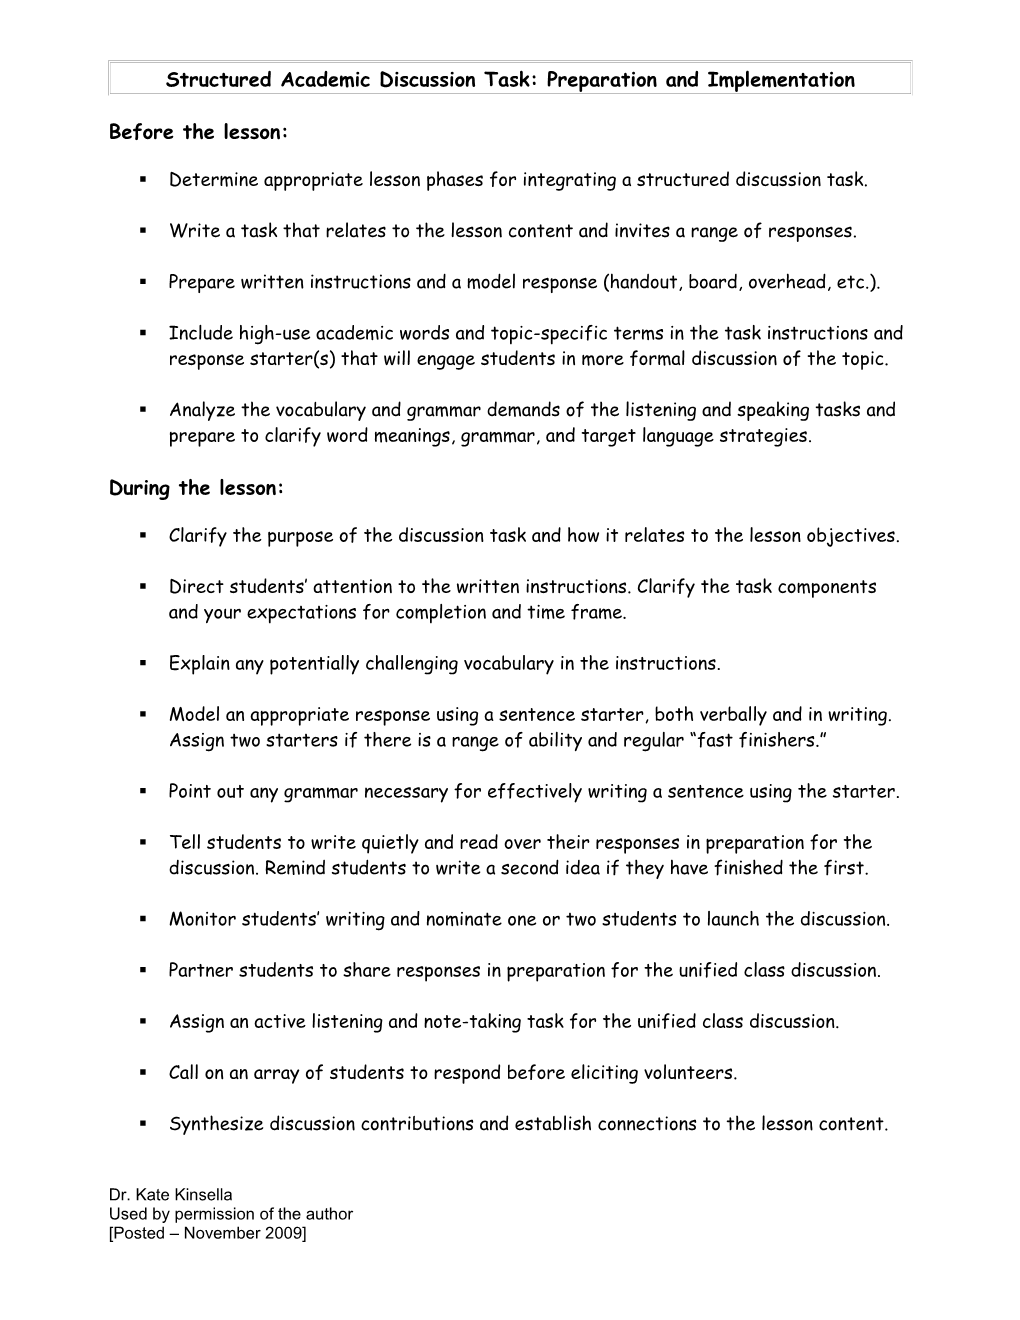 Steps in Setting up a Structured Academic Discussion Task